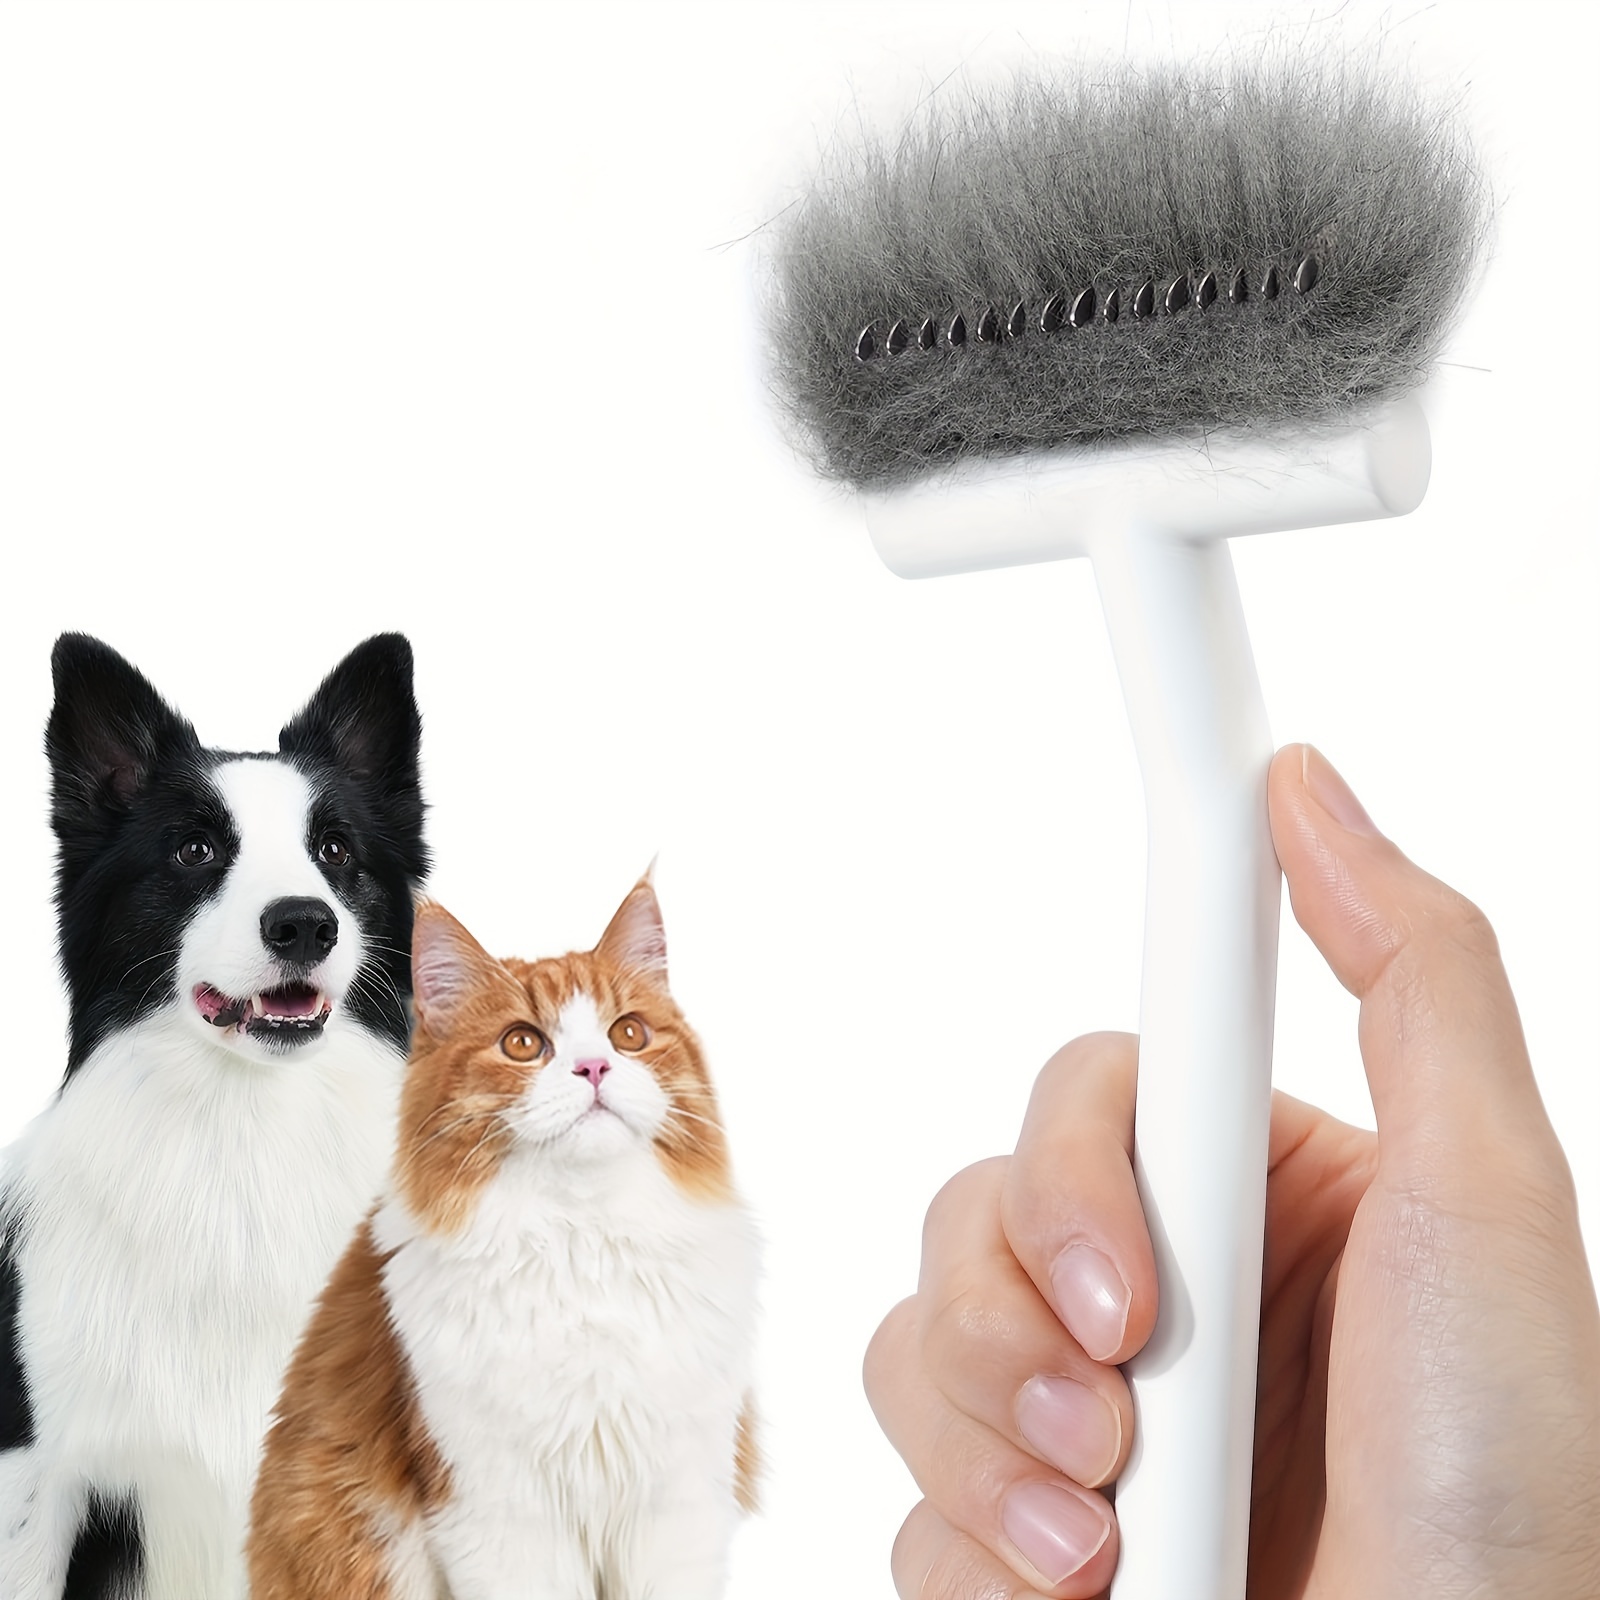 

Cat Brush For Long Haired Cats, Dog Brush For Shedding Grooming Double Coat Dogs, Pet Deshedding Tool And Dematting Comb Remove Loose And Matted Fur, Pet Grooming Undercoat Rake